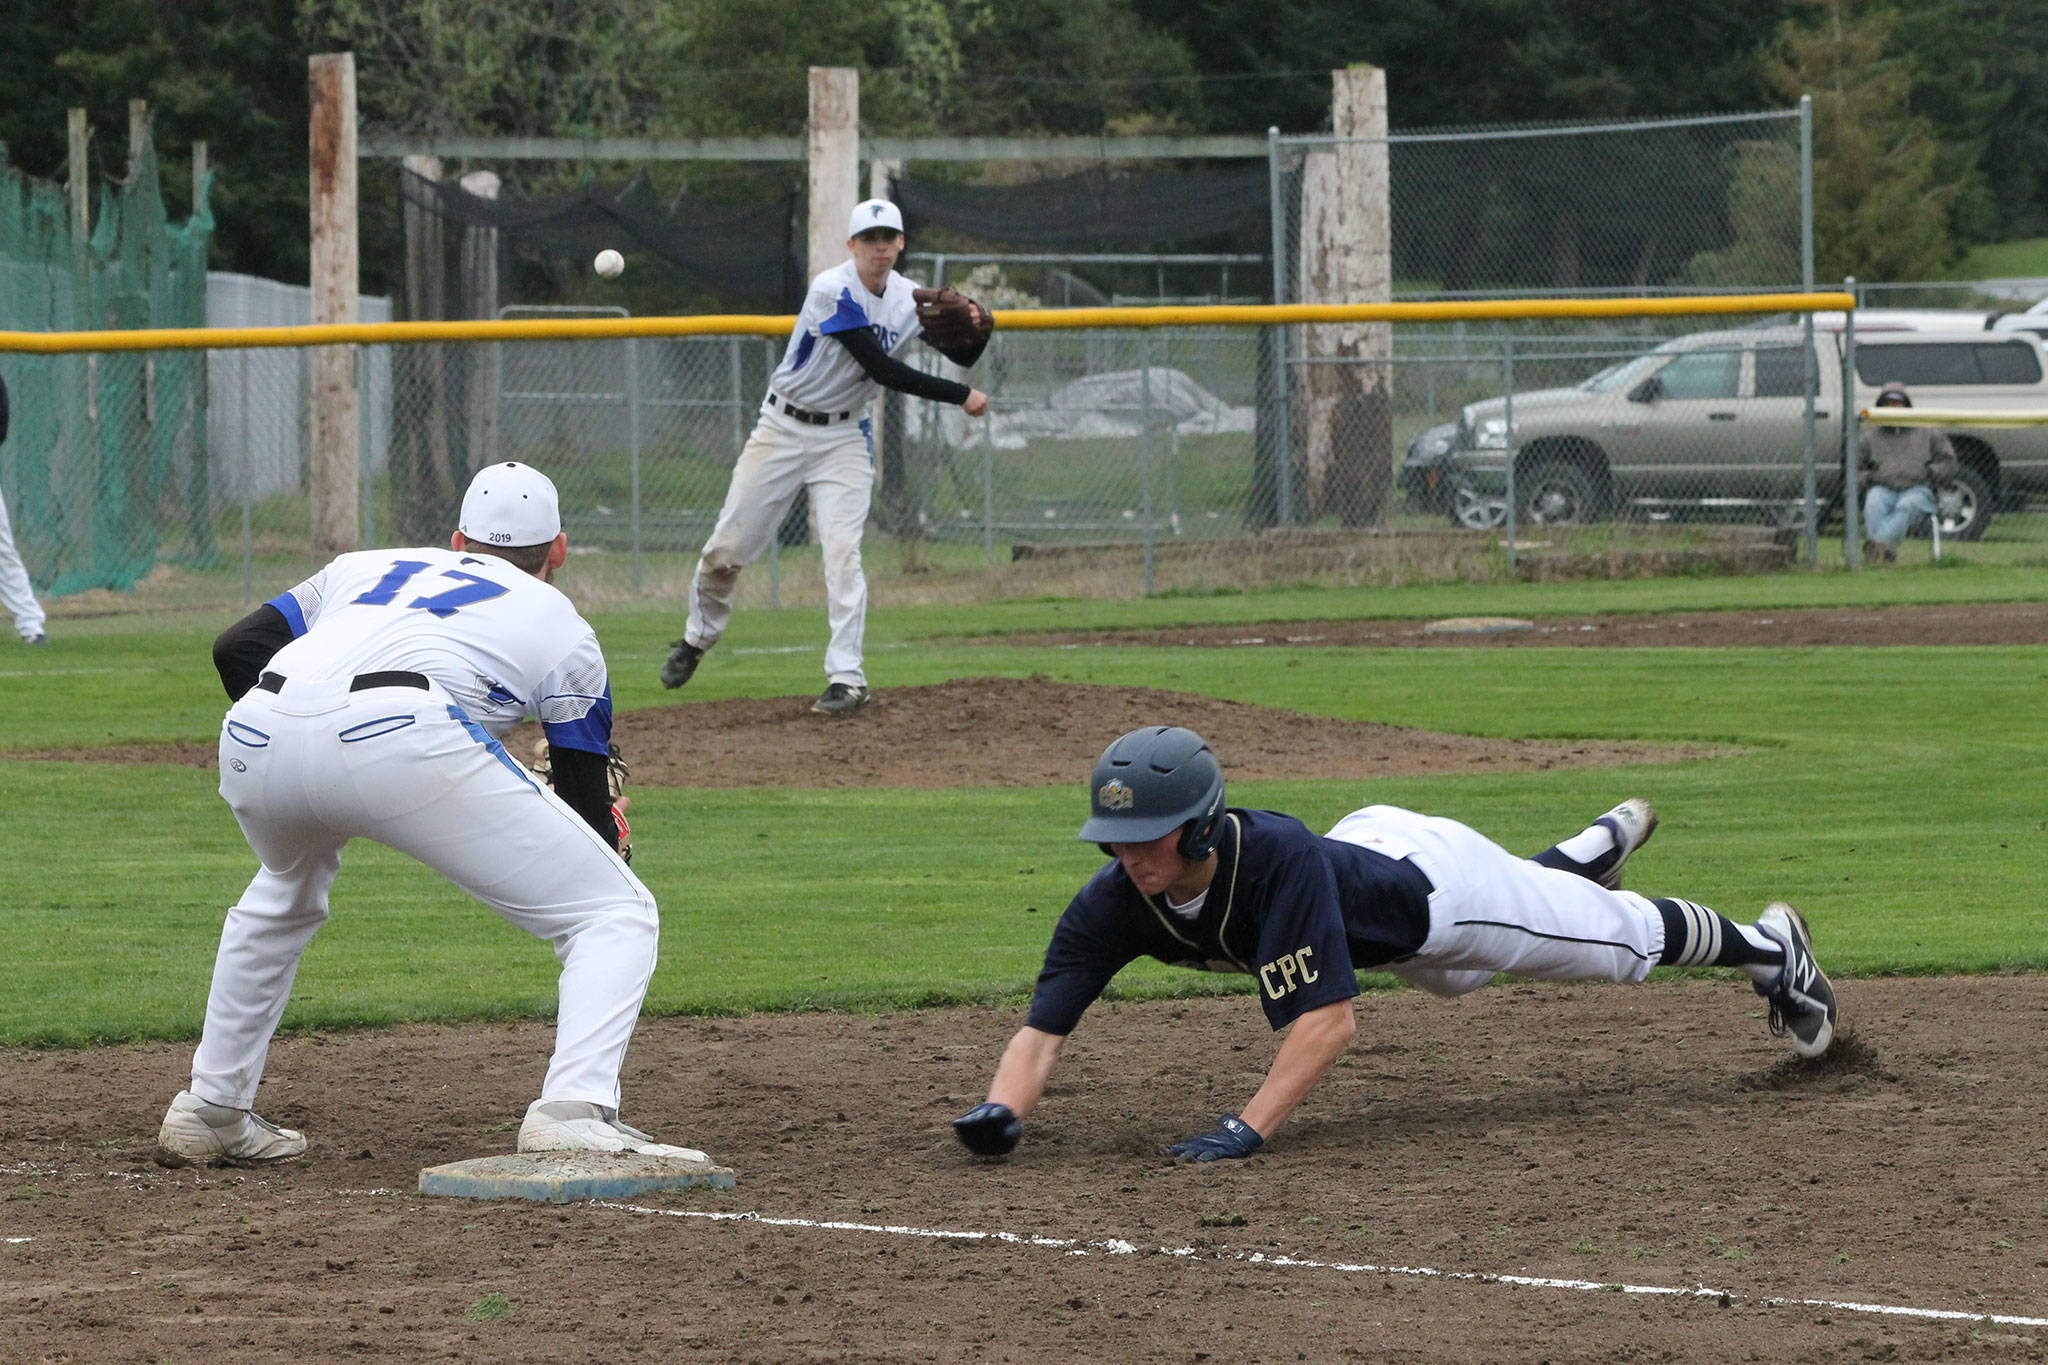 South Whidbey pitcher Ethan Petty throws to first baseman Brent Batchelor in an attempt to pick off a Cedar Park Christian runner.(Photo by Jim Waller/South Whidbey Record)